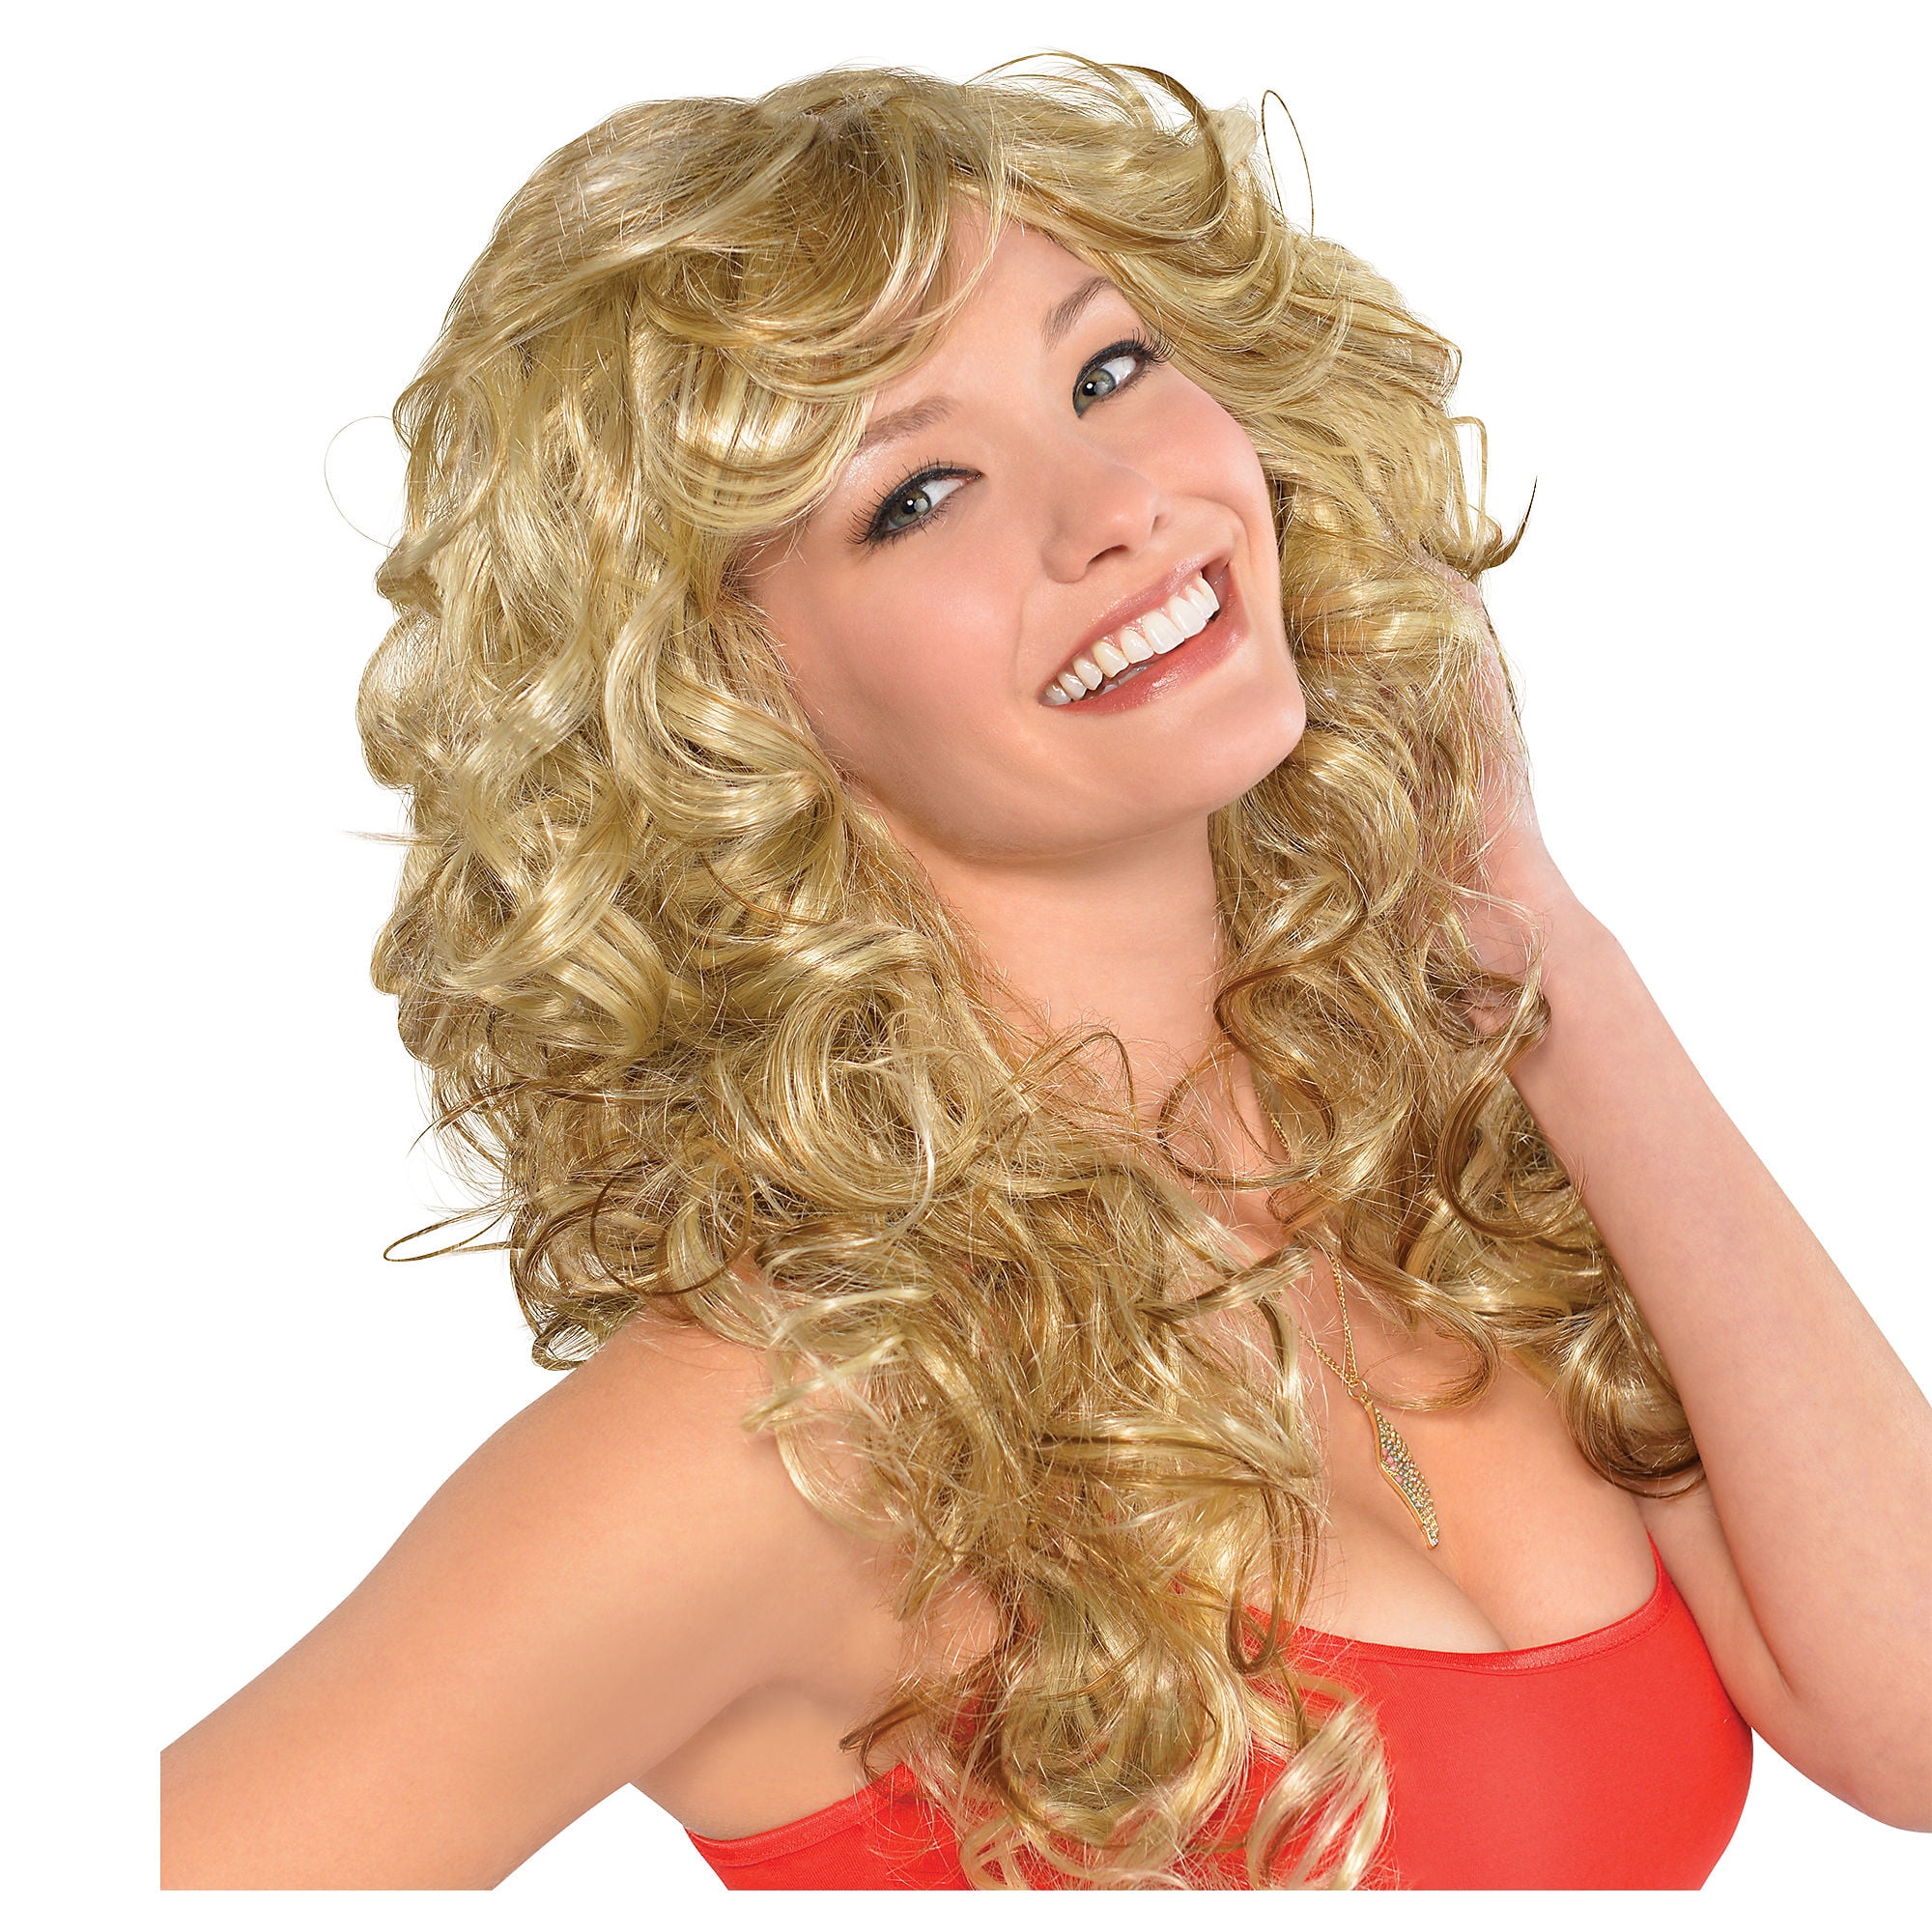 ADULT PARTY CUSTOM A 10 X MULLET NOVELTY HAIR WIG SANDY BLONDE COLOUR COLOR 